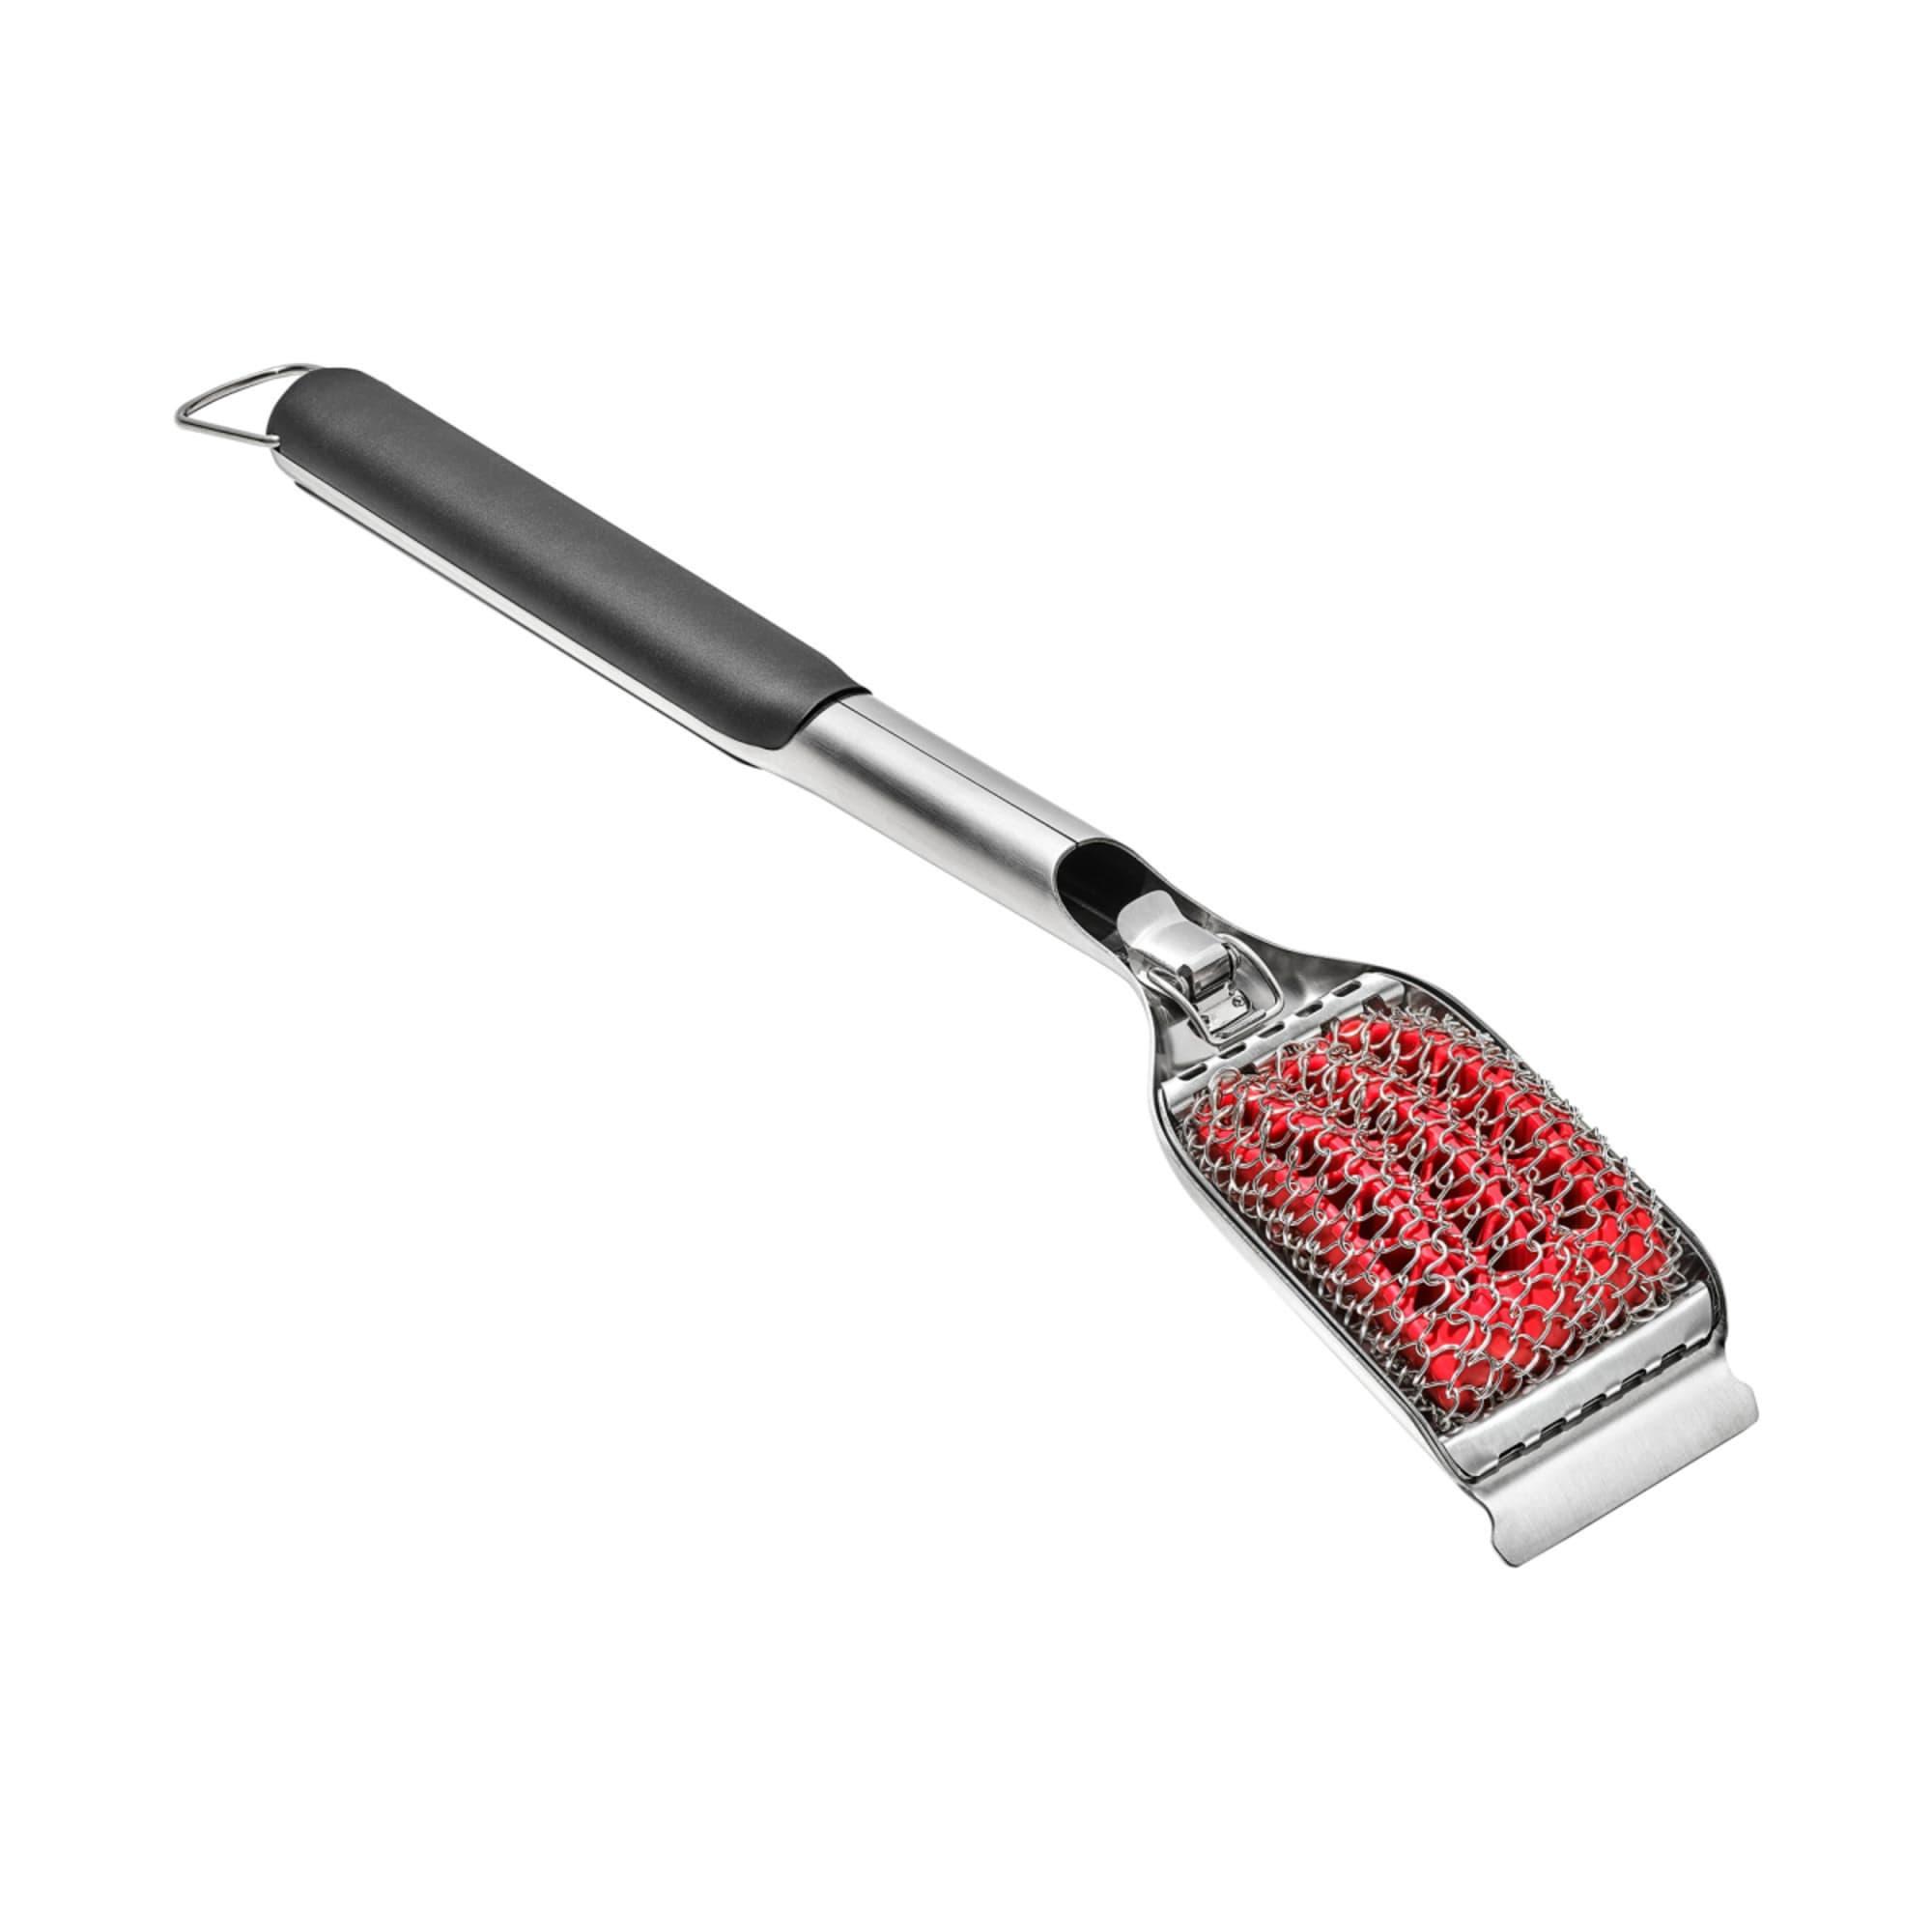 OXO Good Grips Hot Clean Grill Brush with Replacement Head Image 3